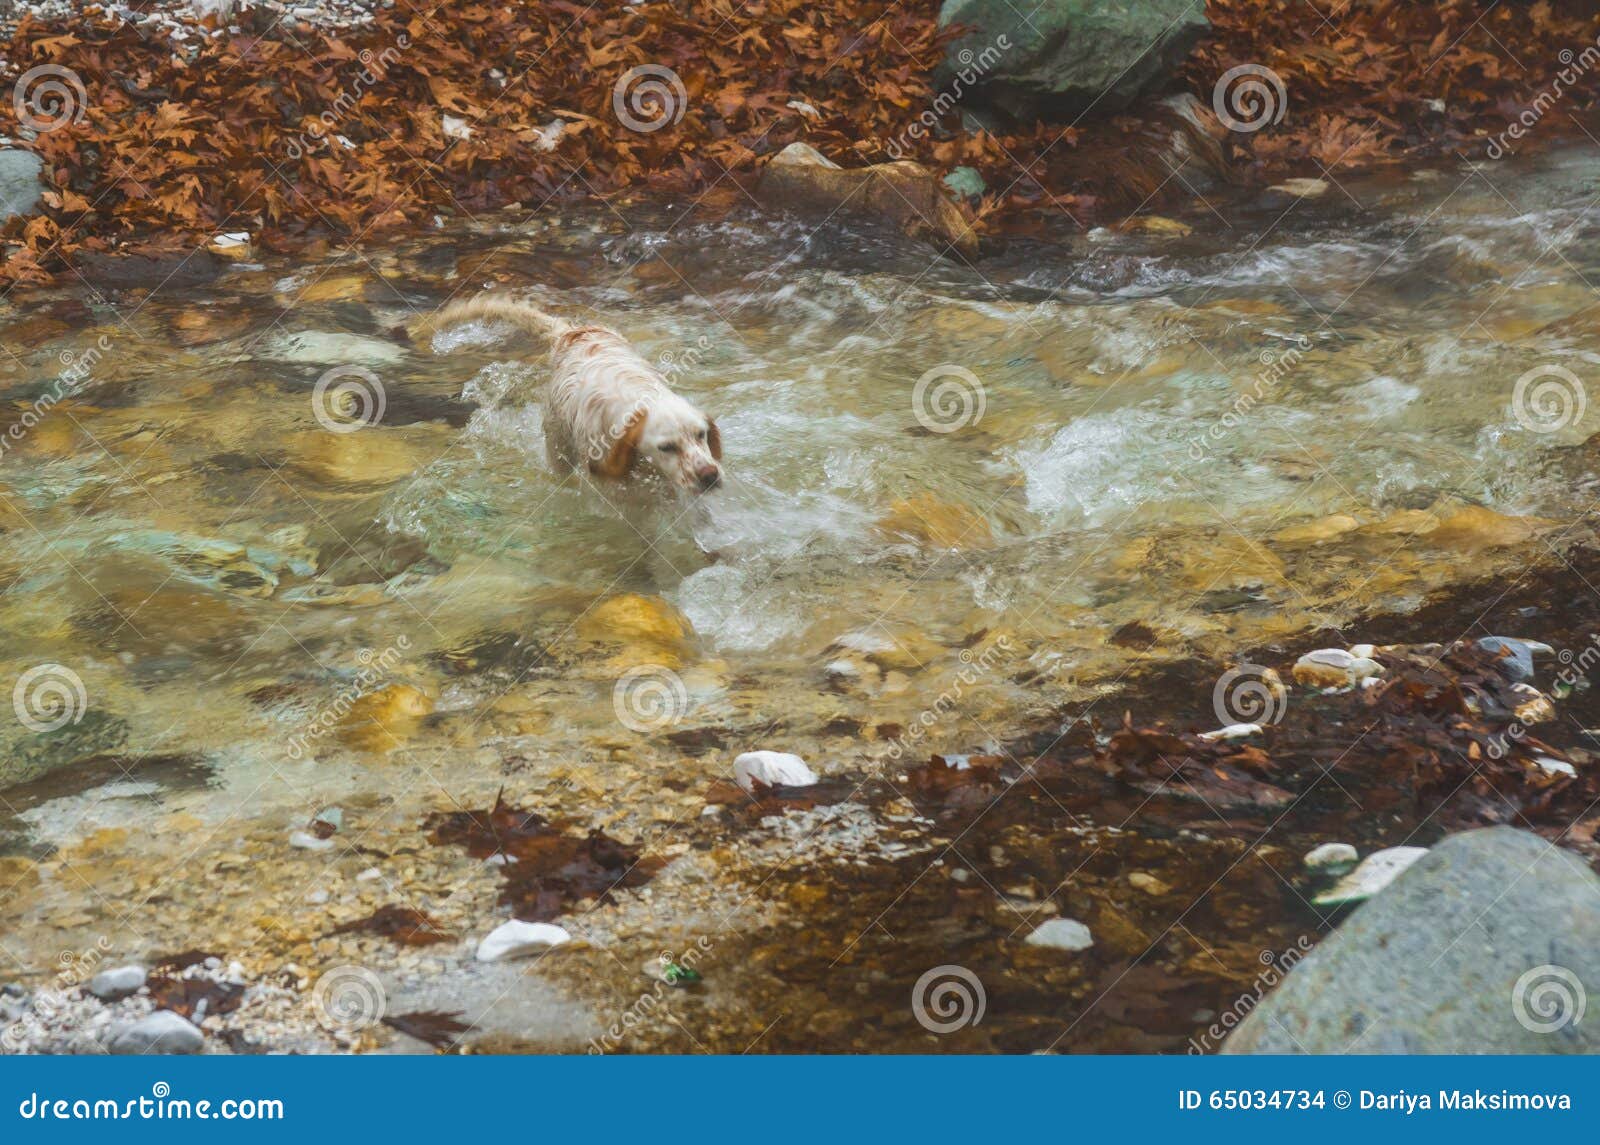 dog in a river with colored stones and hot springs in loutra pozar